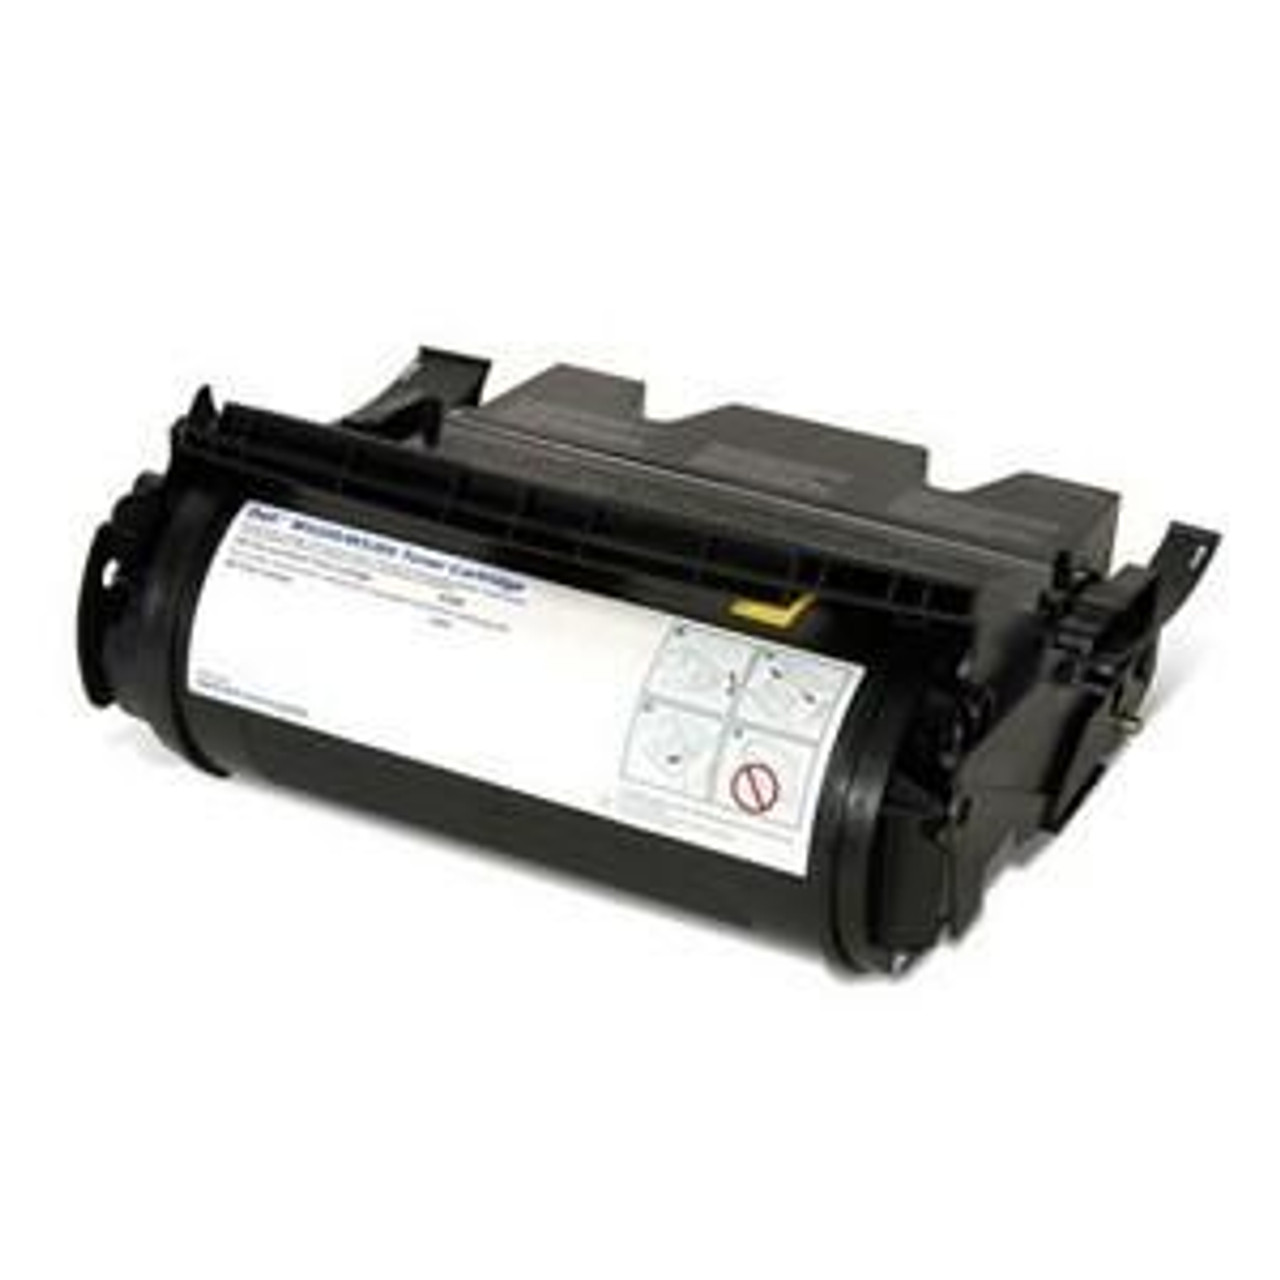 341-2918 Dell 10000-Page Black Toner Cartridge for 5210